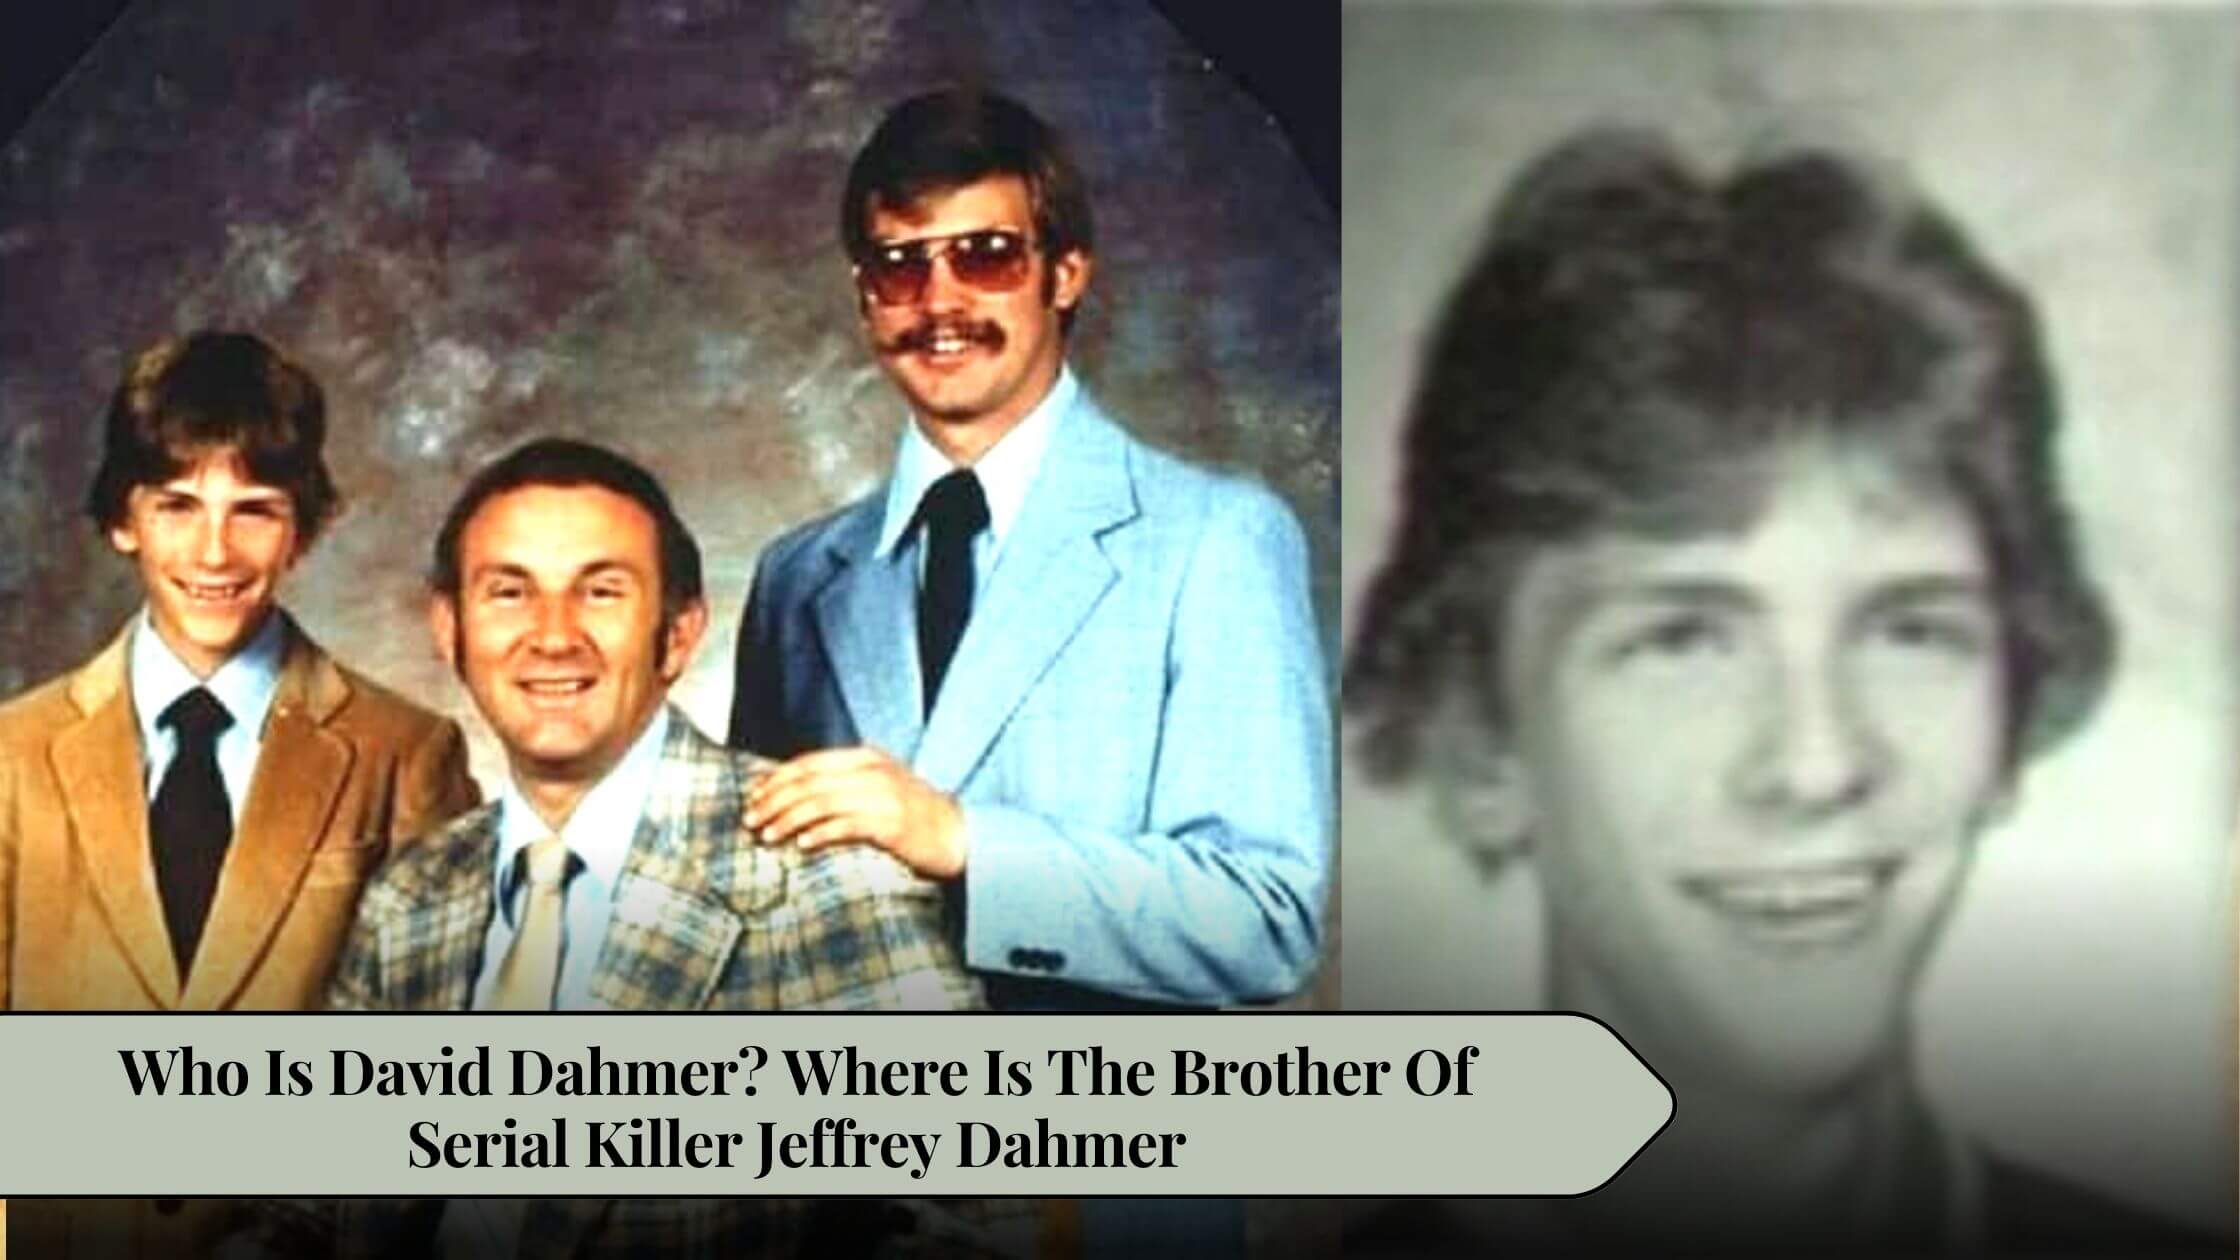 Who Is David Dahmer Where Is The Brother Of Serial Killer Jeffrey Dahmer